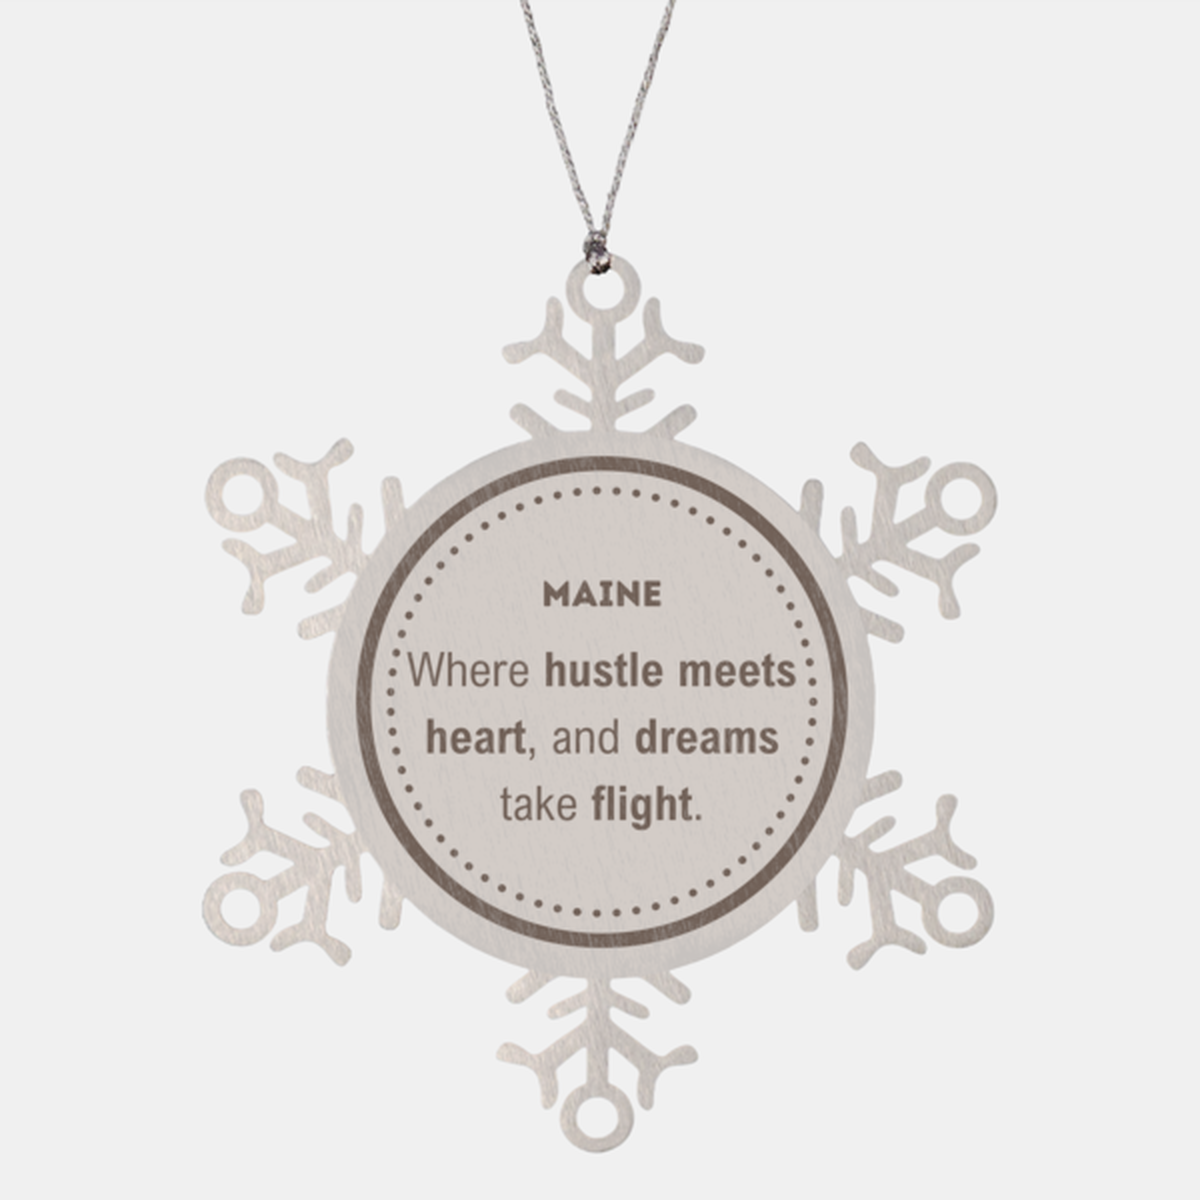 Maine: Where hustle meets heart, and dreams take flight, Maine Ornament Gifts, Proud Maine Christmas Maine Snowflake Ornament, Maine State People, Men, Women, Friends